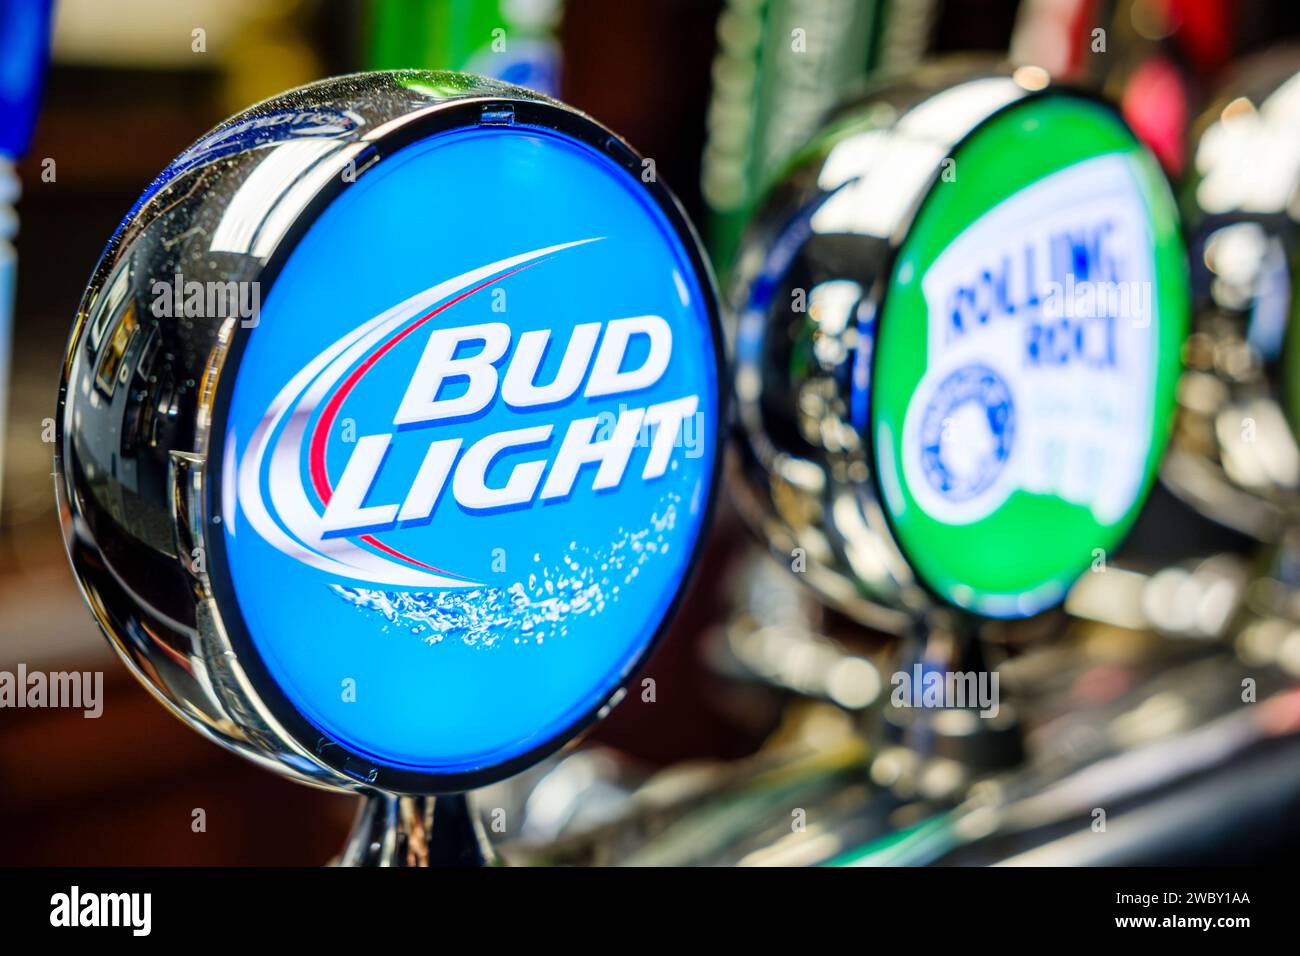 American beer, beer branding, Bud Light beer tap, lager beer pump handle in a bar, pub beer serving counter showing budlight brand and beer taps, USA Stock Photo